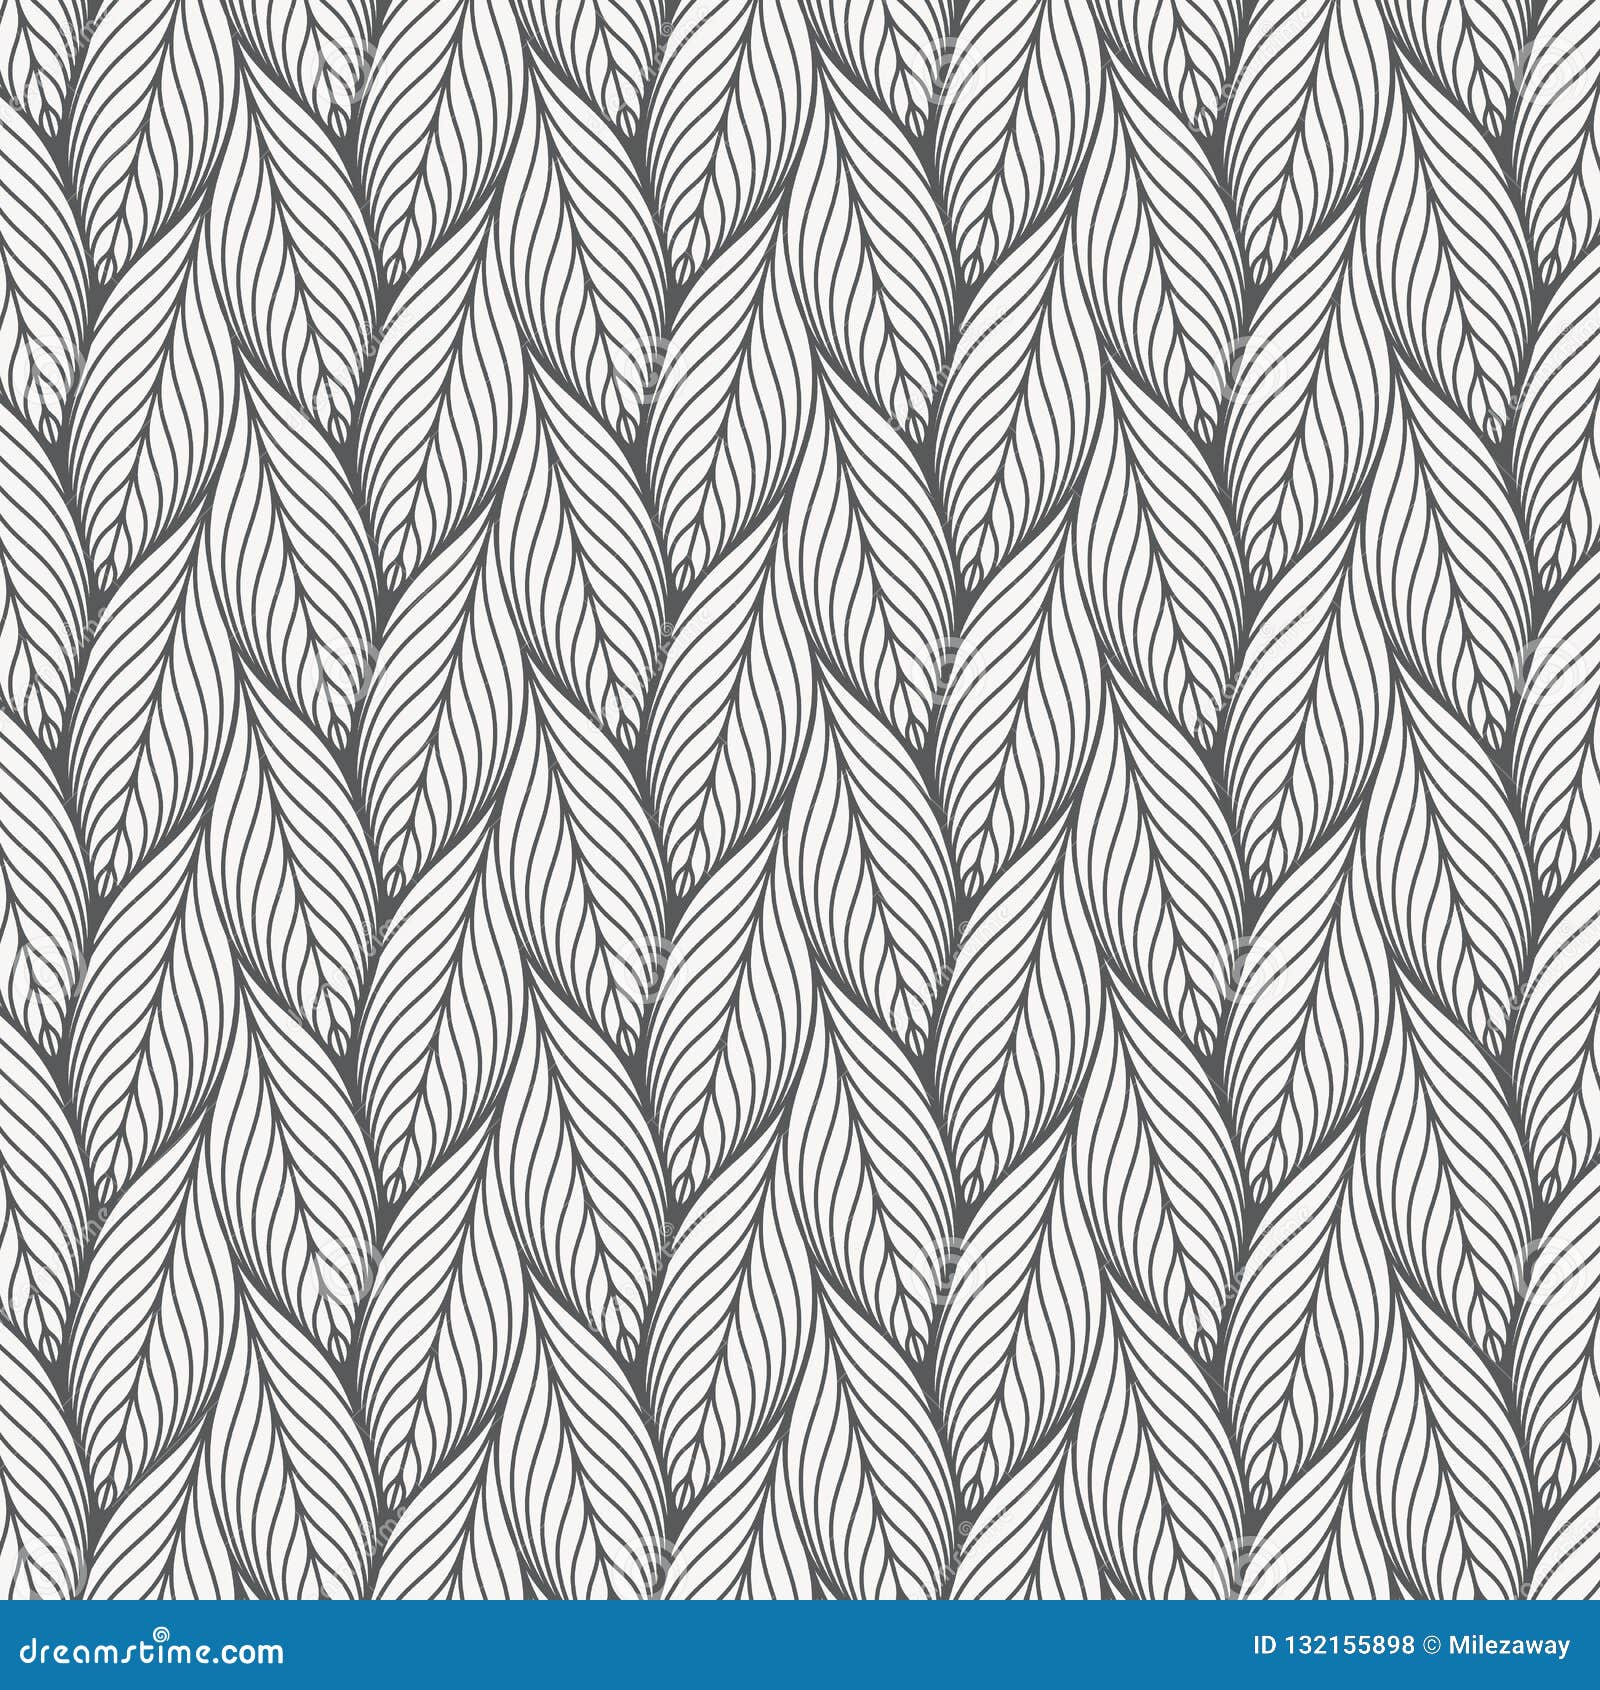 Abstract Linear Leaves Vector Pattern, Repeating Small Skeleton Leaf